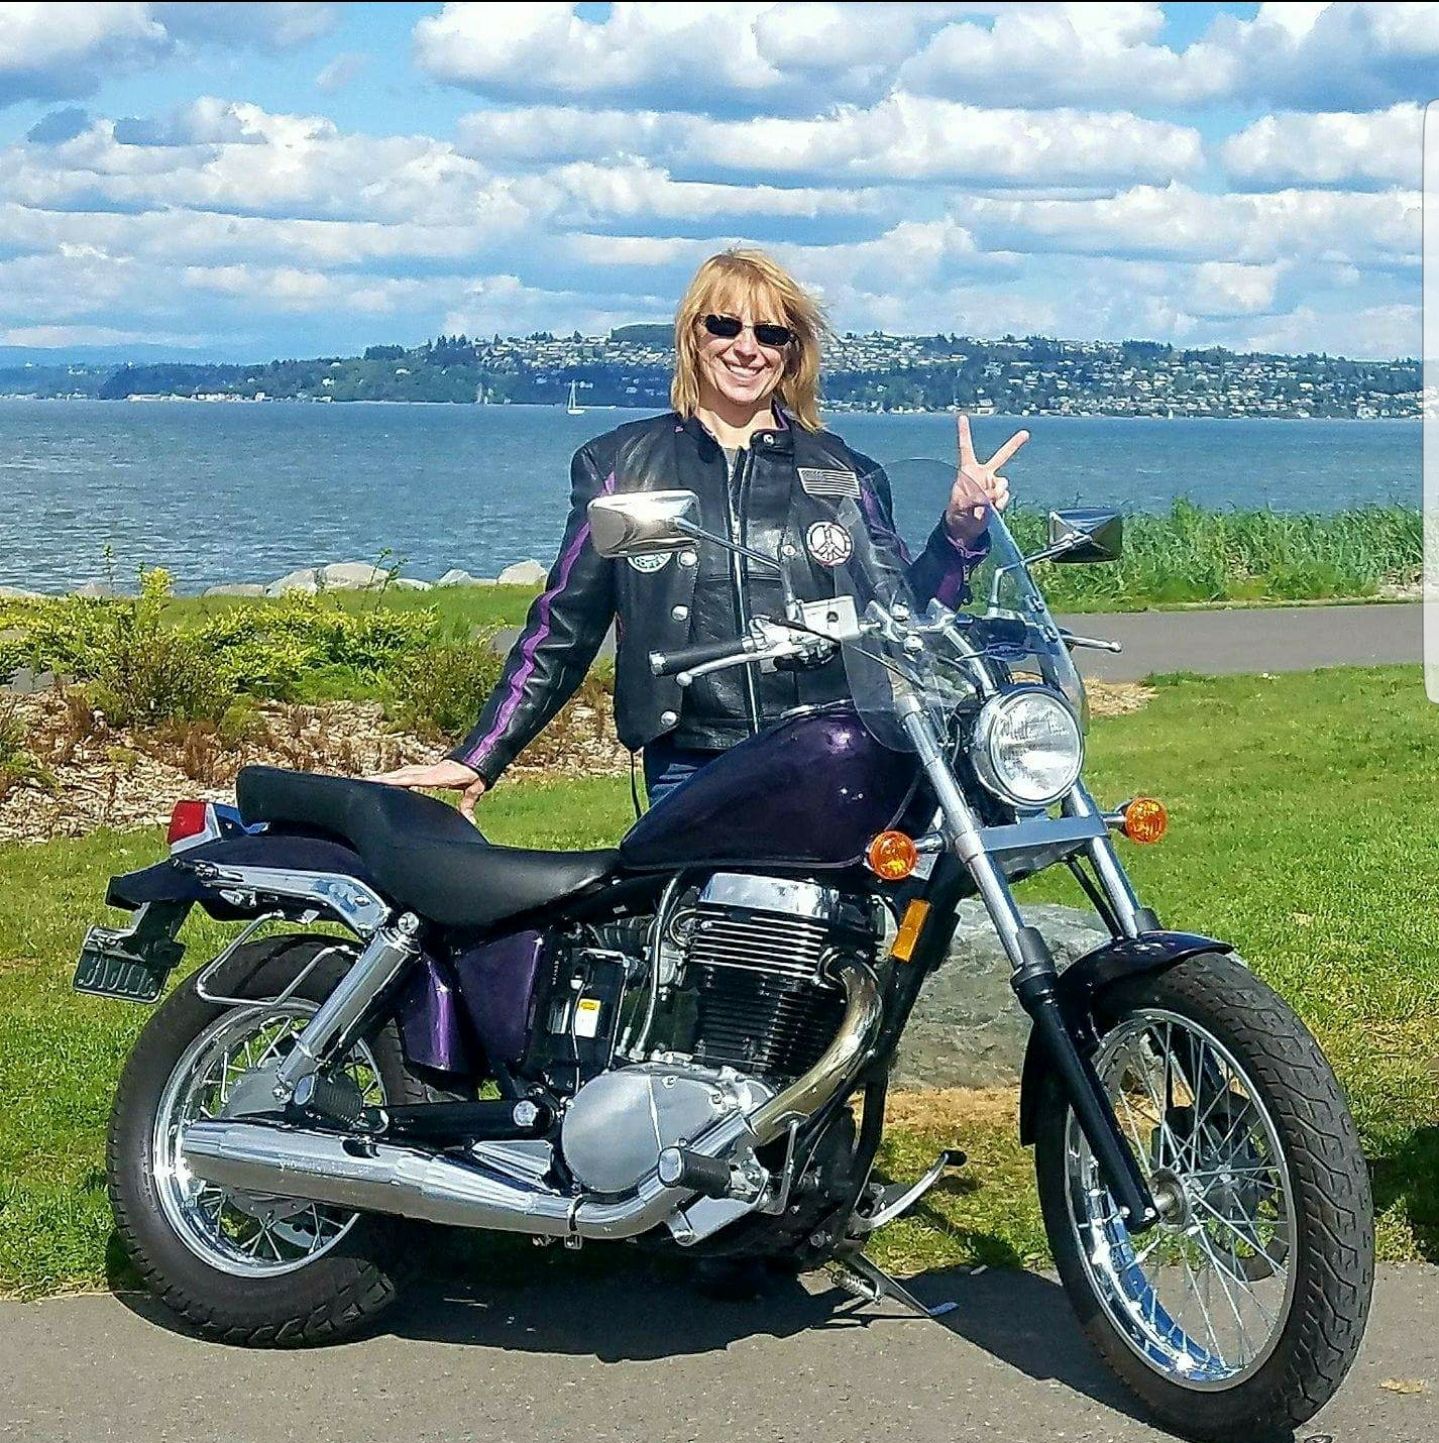 My first international female ride day! May 2017